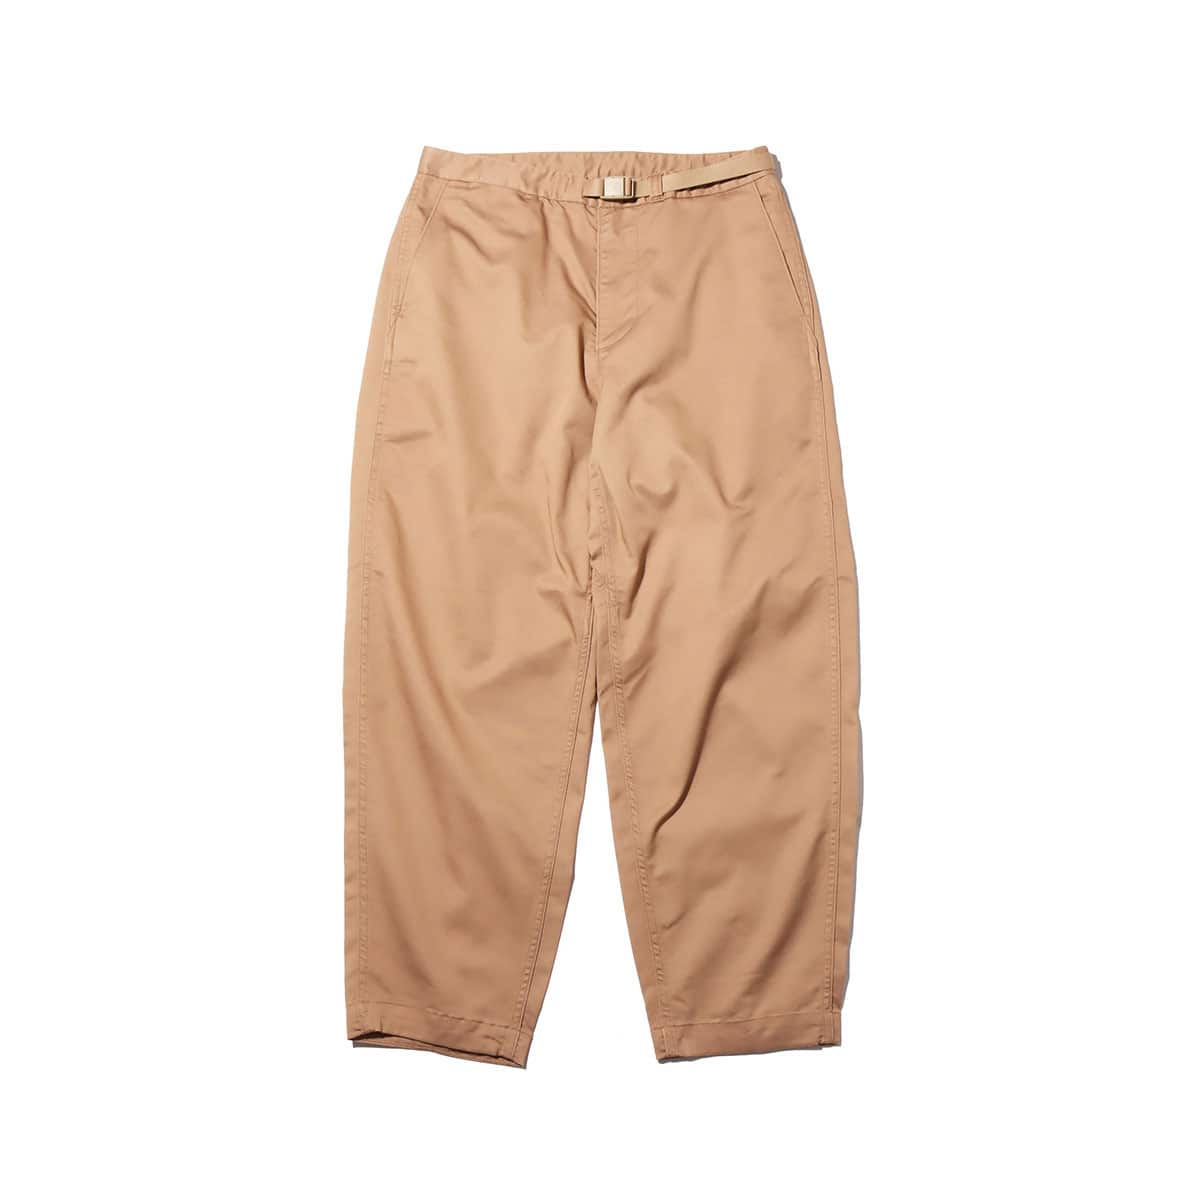 THE NORTH FACE PURPLE LABEL STRETCH TWILL WIDE TAPERED PANTS TAN 21FW-I_photo_large